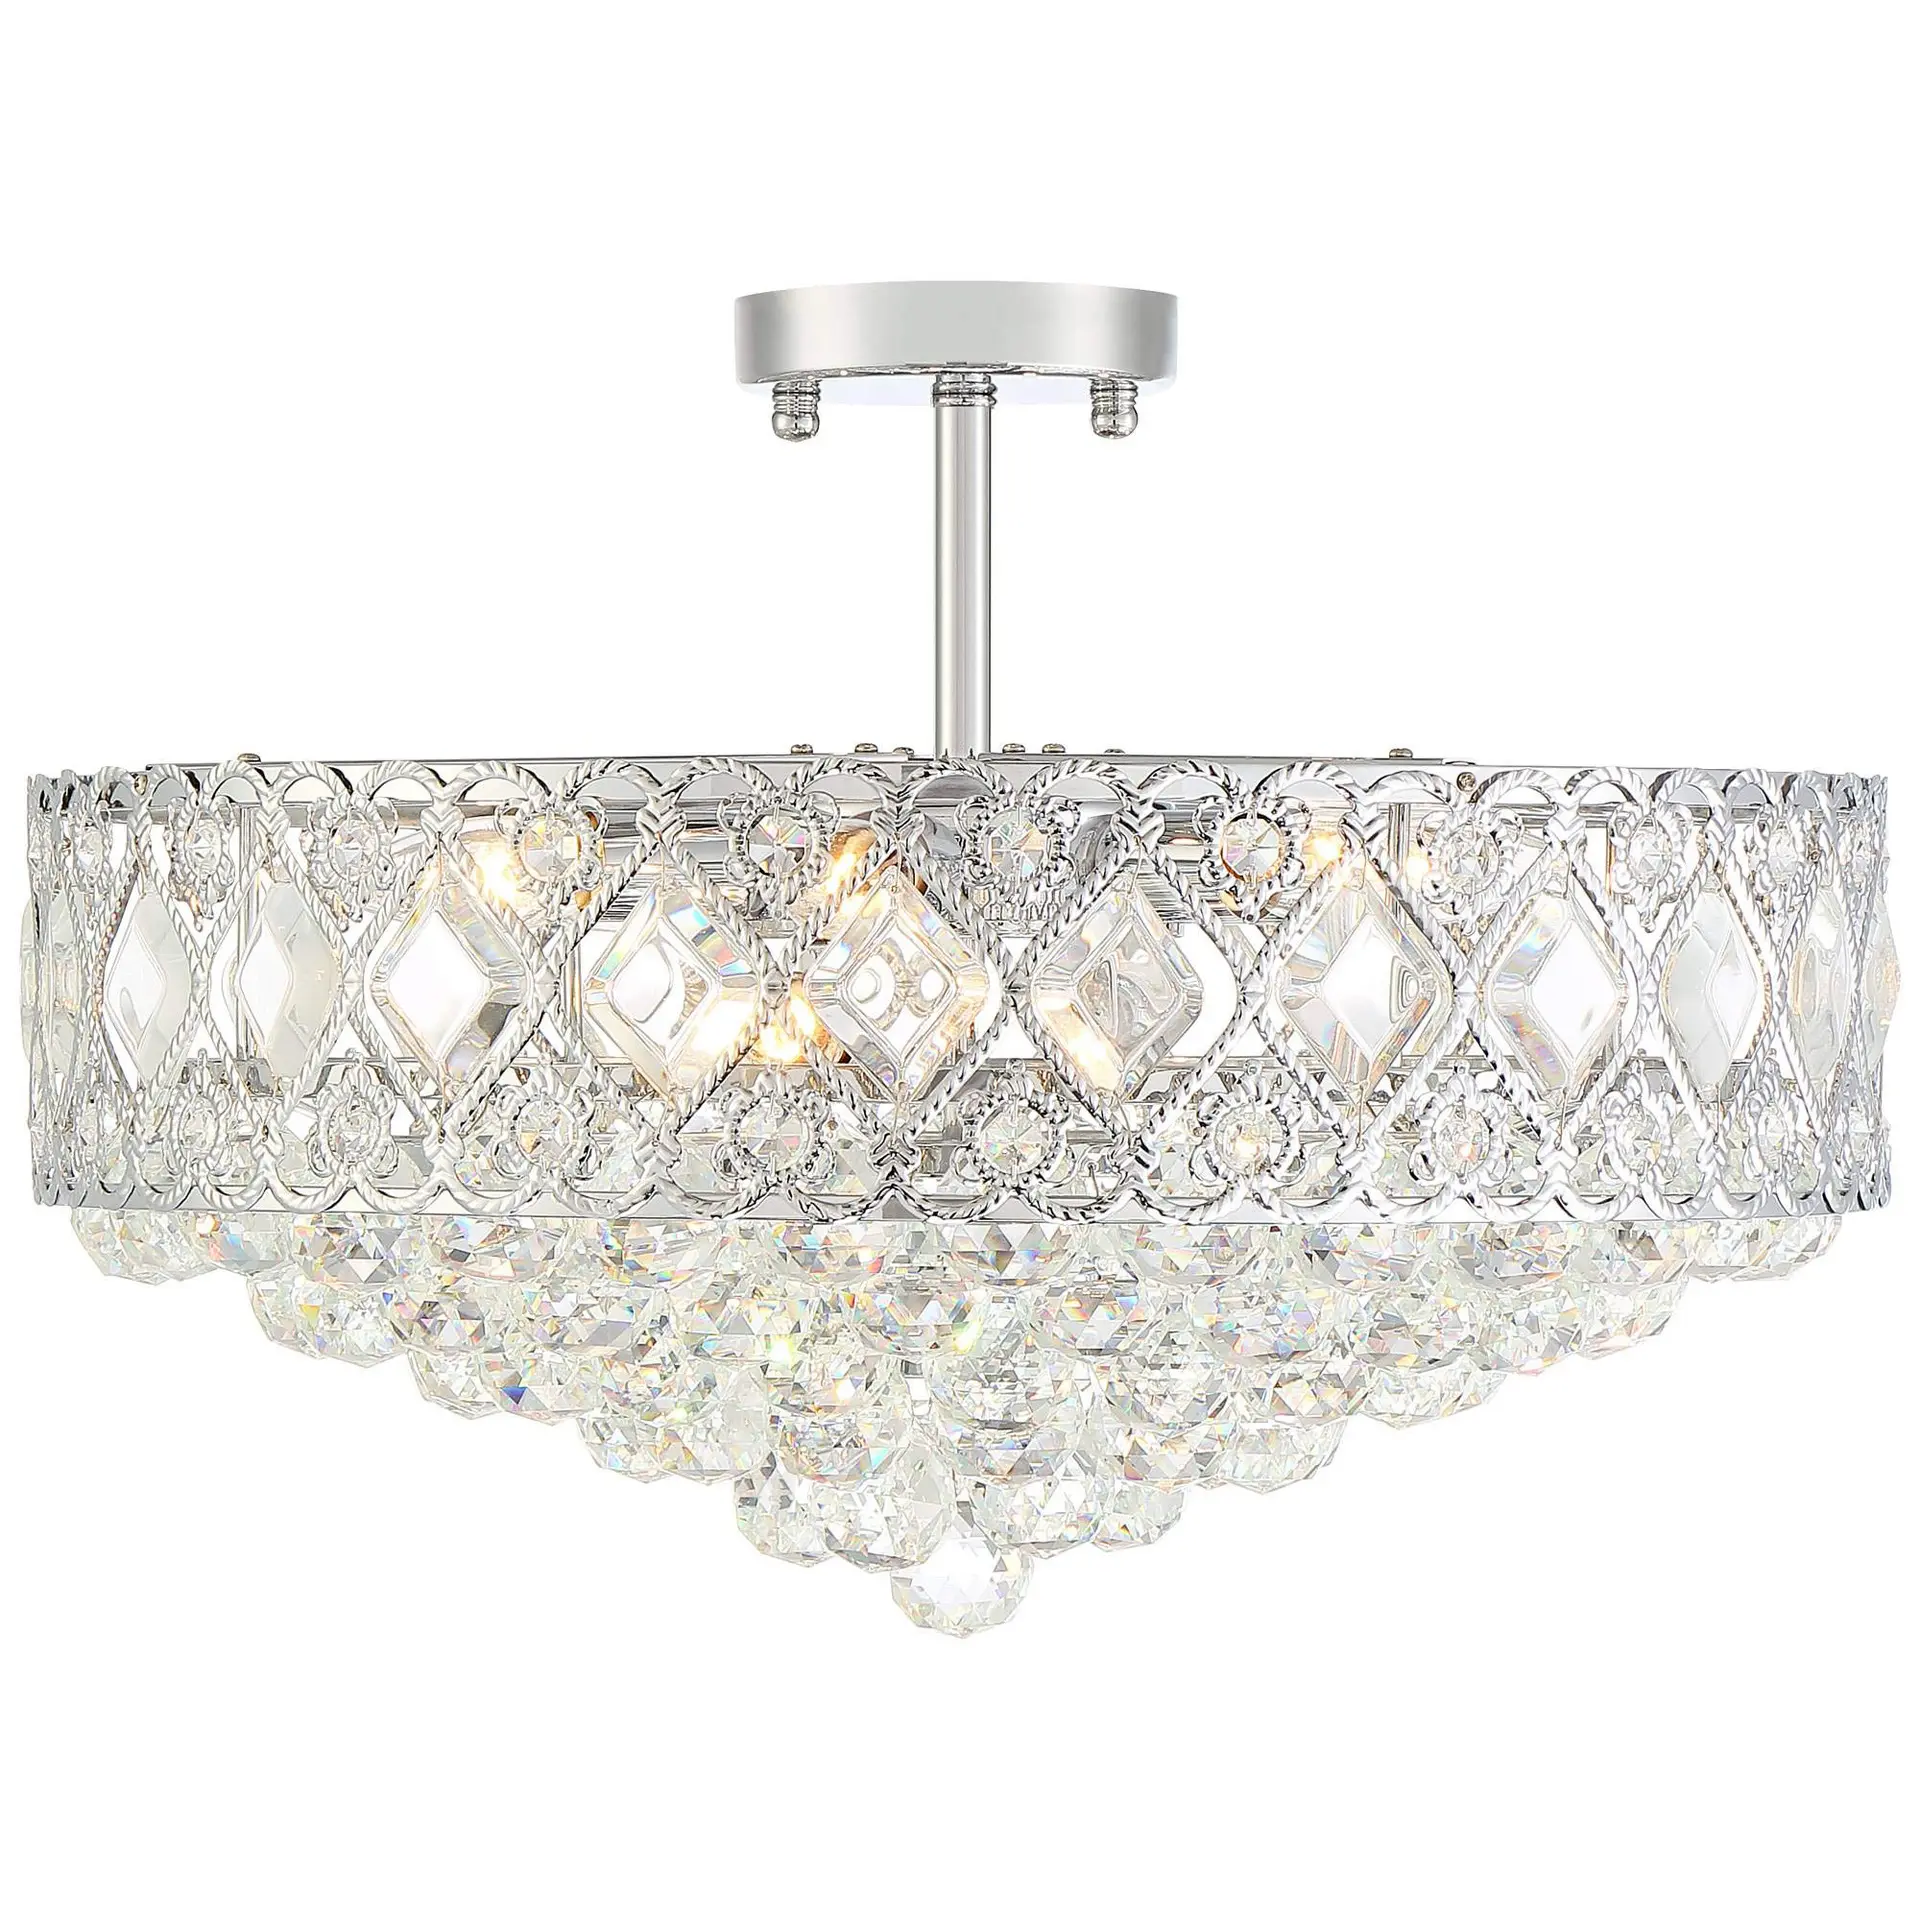 Crystal Chandelier Modern Luxury Pendant Ceiling Lights Fixture for Dining Living Room